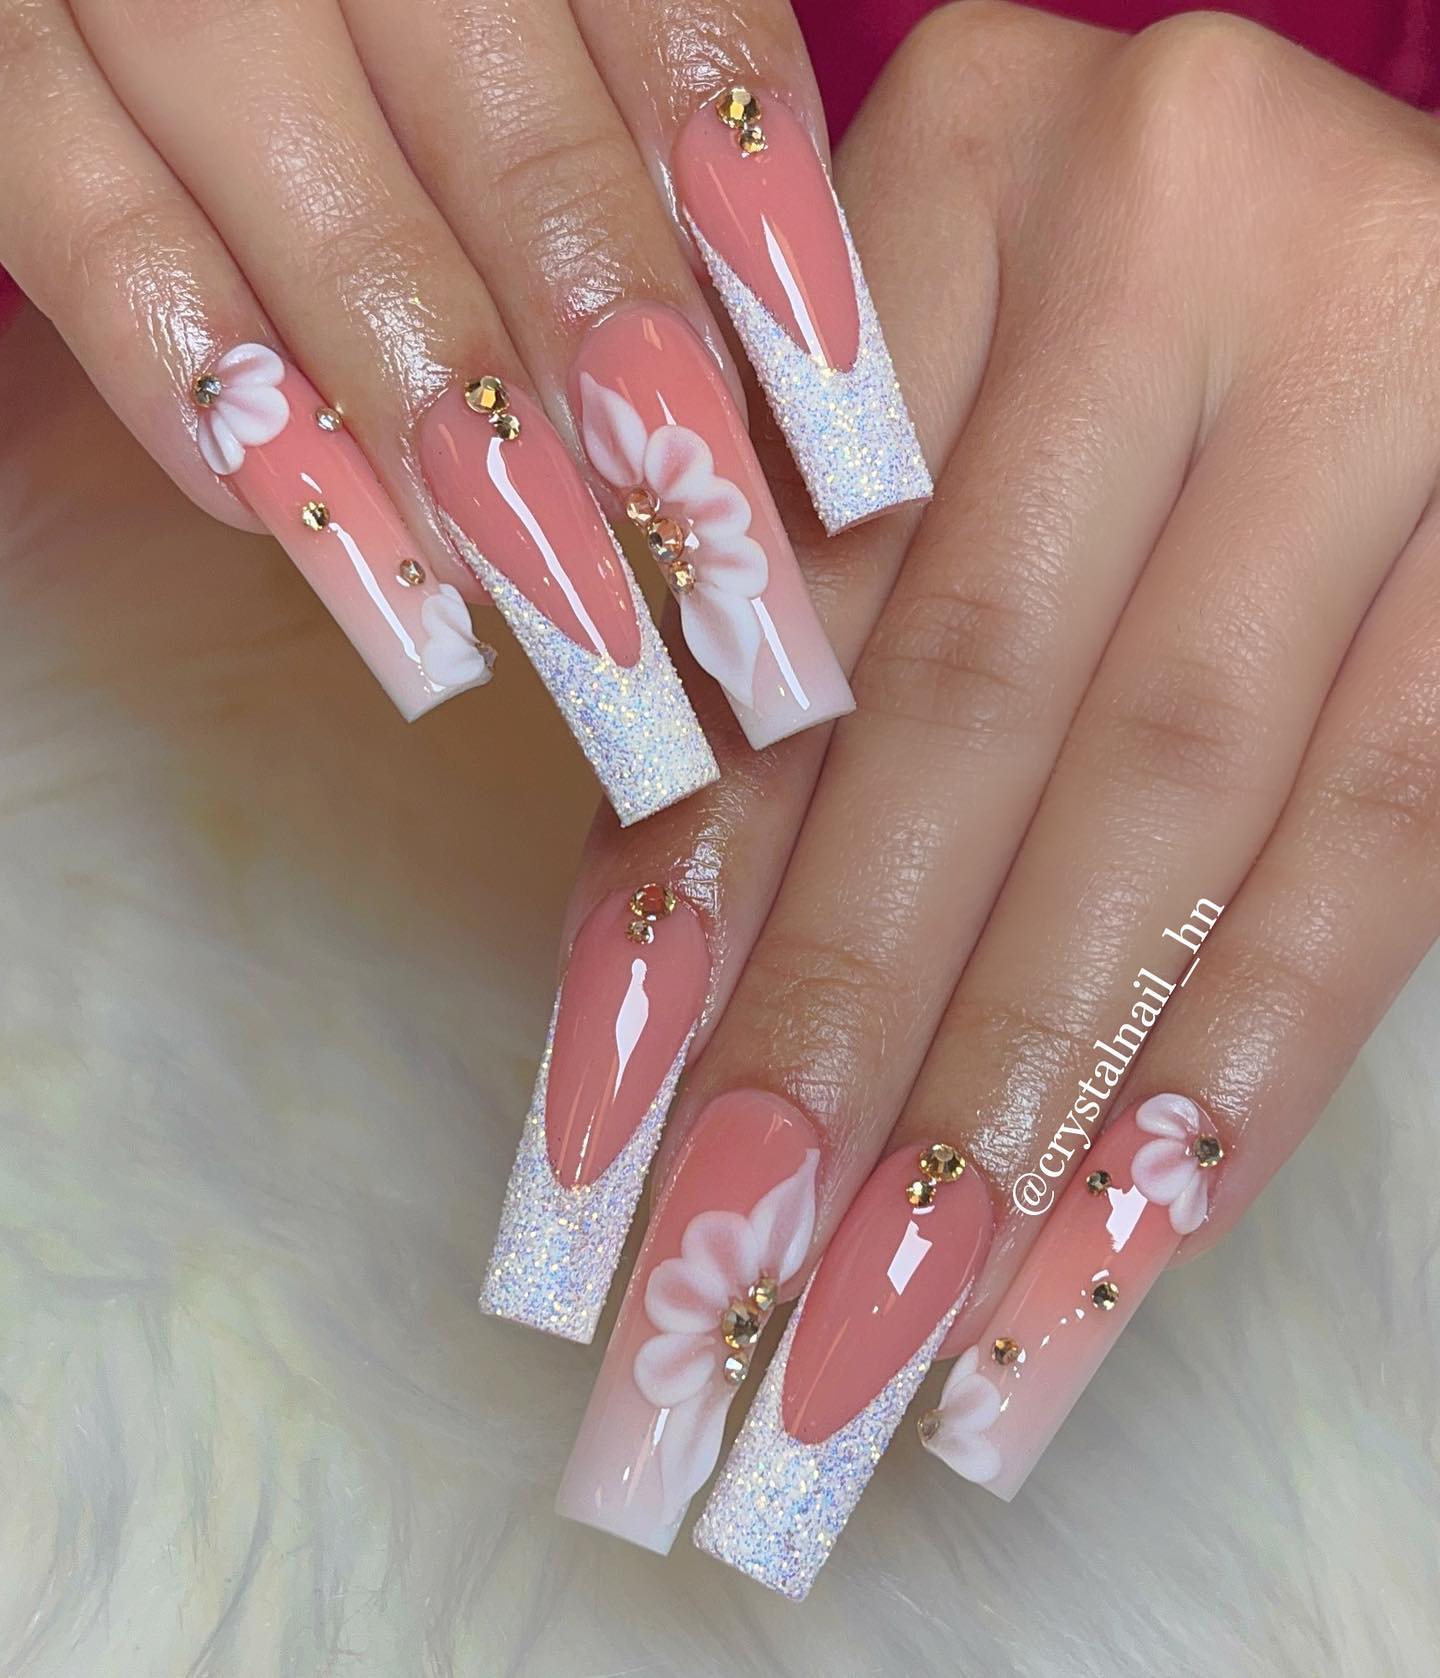 Women who plan on getting married sometime soon might fancy this manicure the most. It is a gorgeous bold French design that is decorated with flowers and giant gemstones which you will enjoy for those glamorous moments.